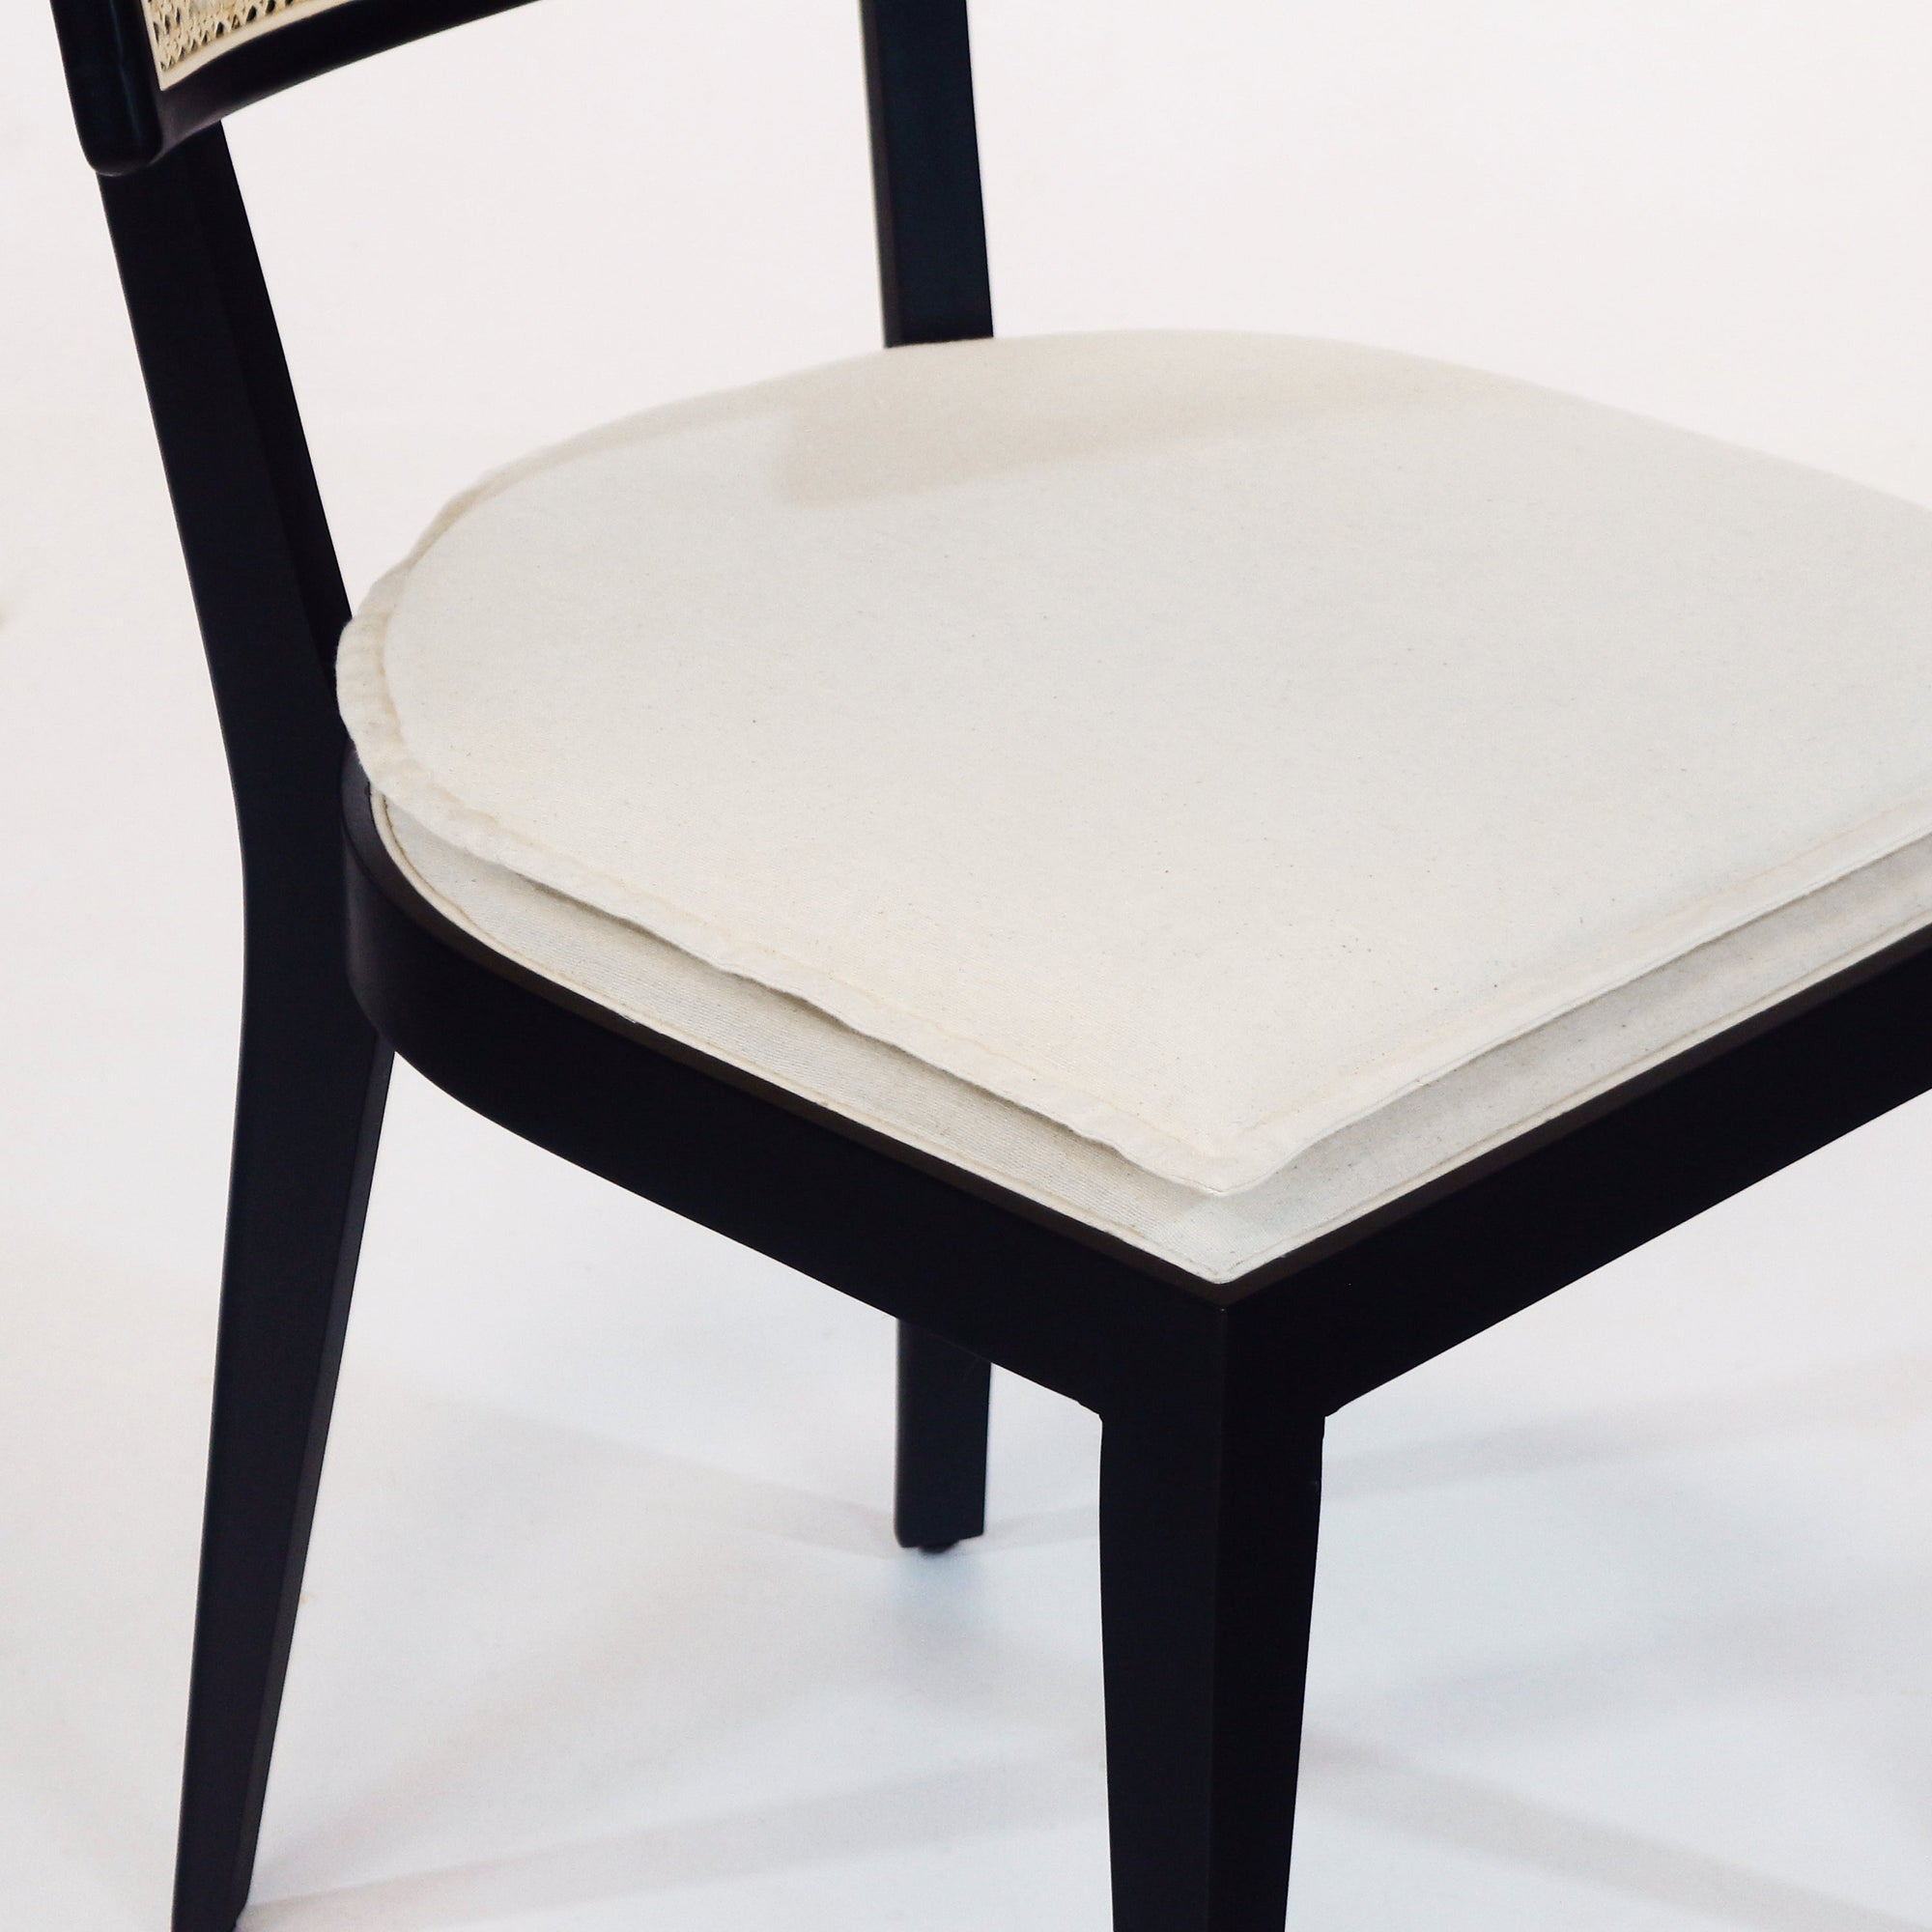 Francois Dining Chair with Rattan Backrest and Upholstered Seat - INTERIORTONIC